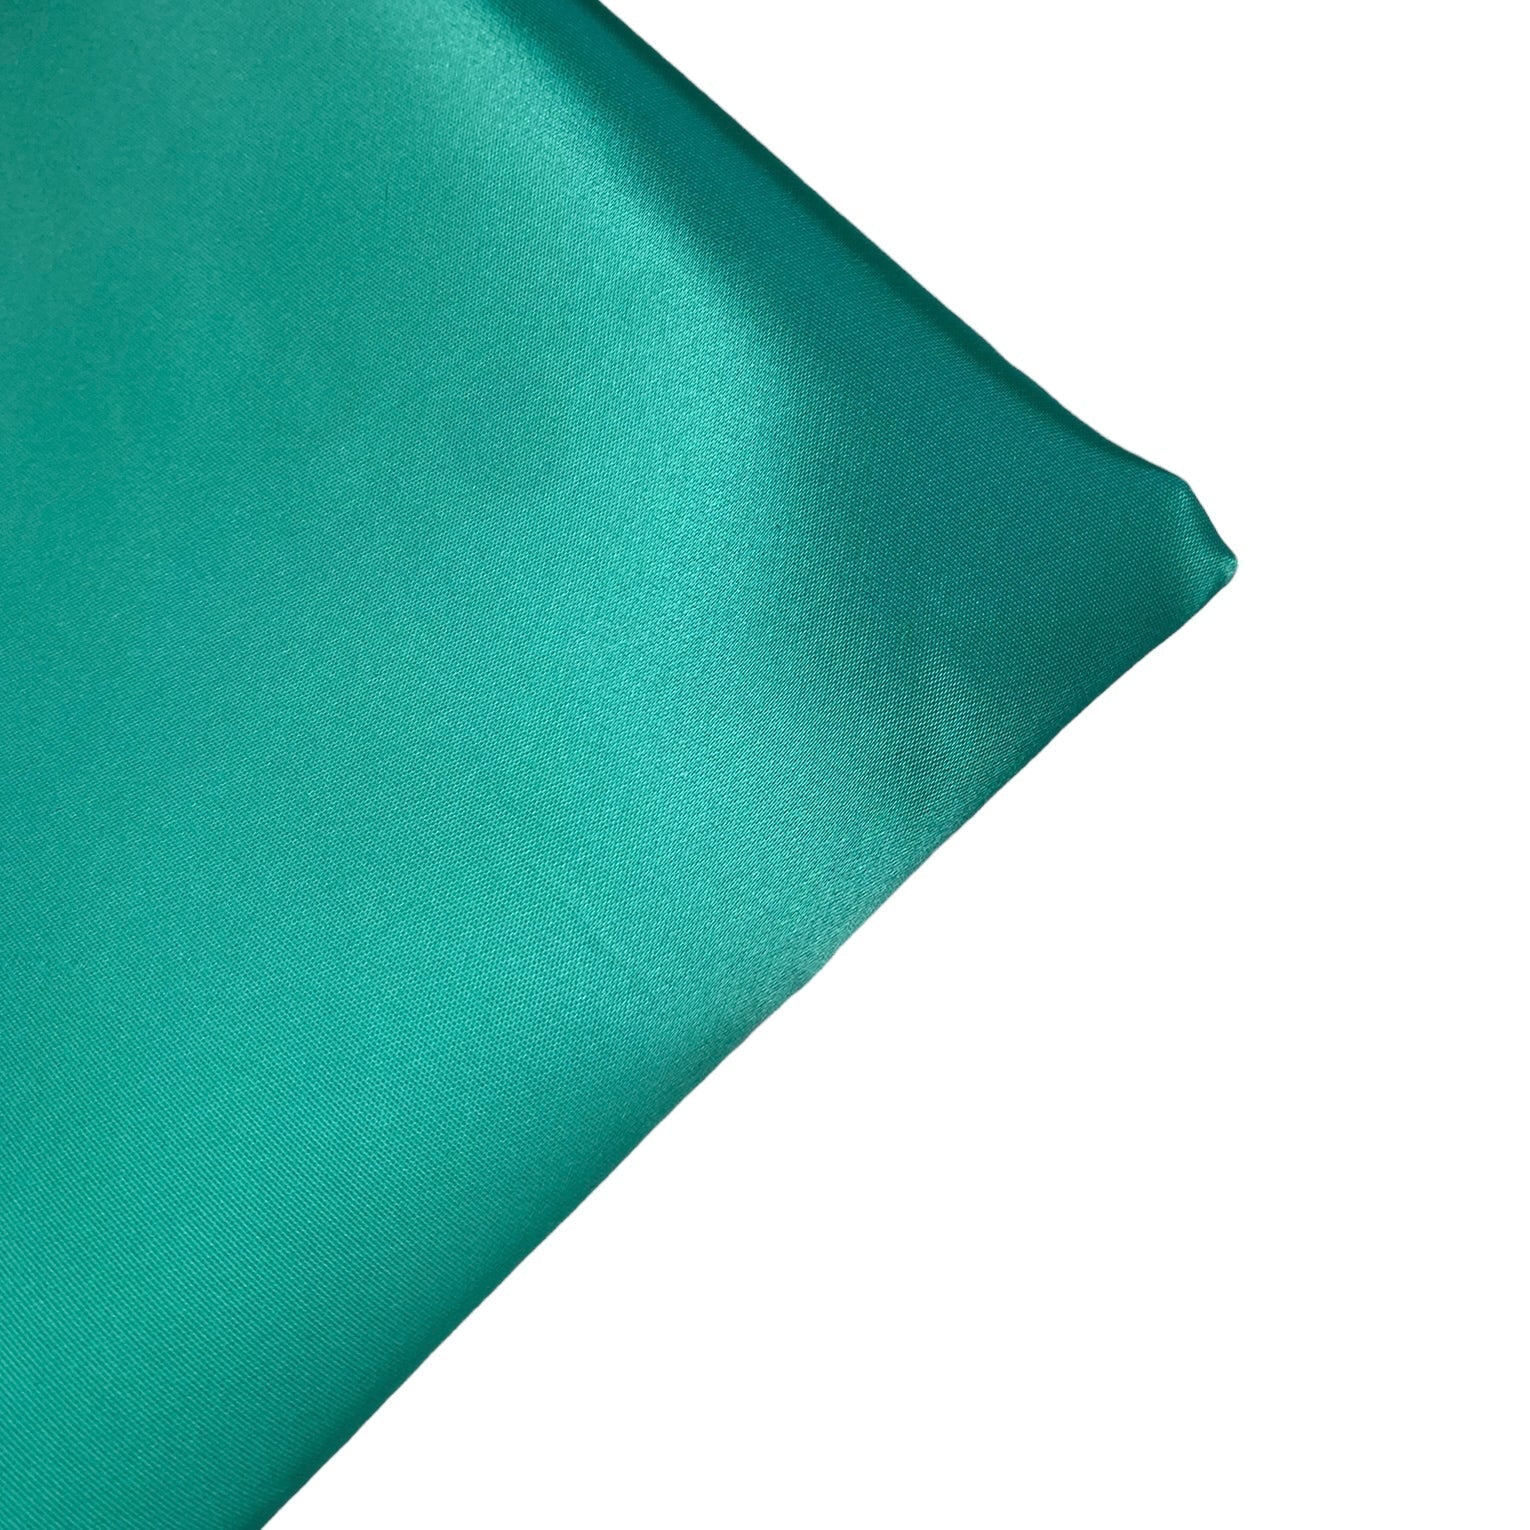 Polyester Satin - 44” - Pale Turquoise